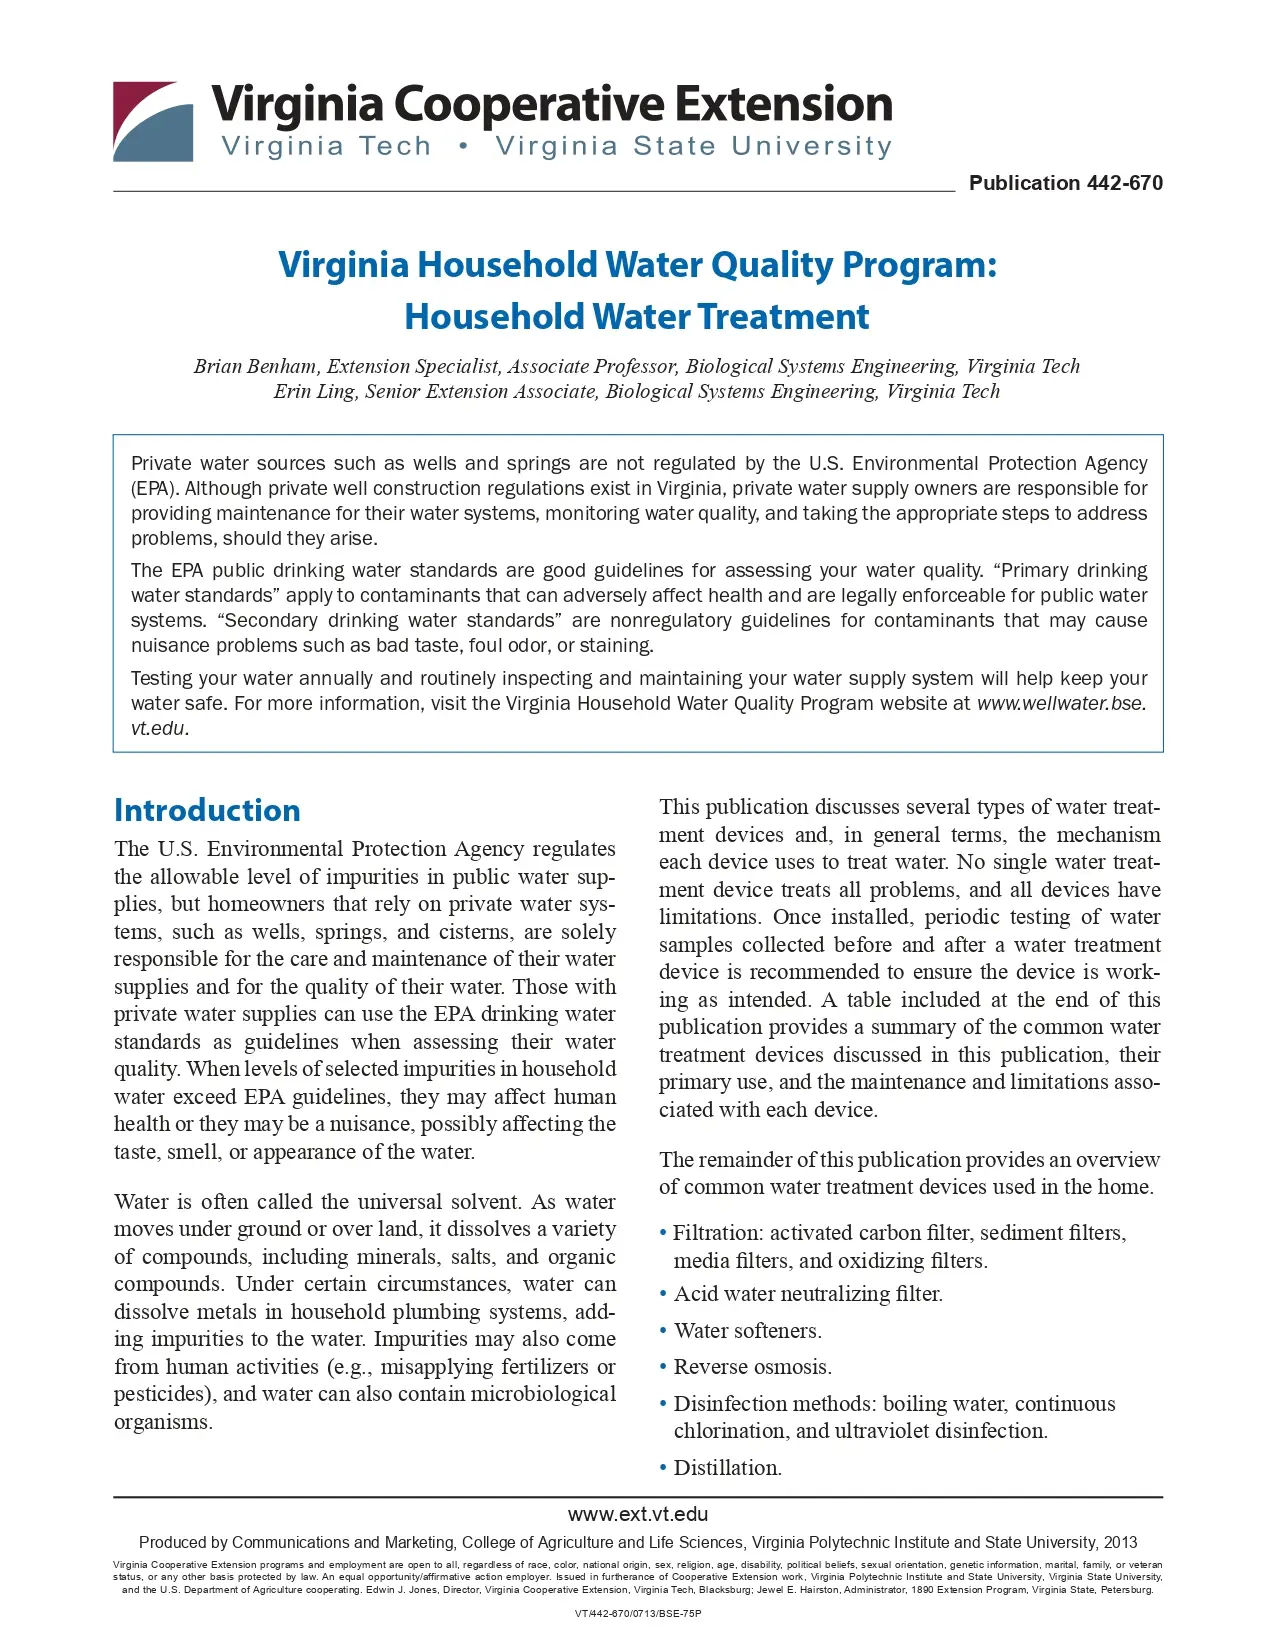 Virginia Household Water Quality Program: Household Water Treatment